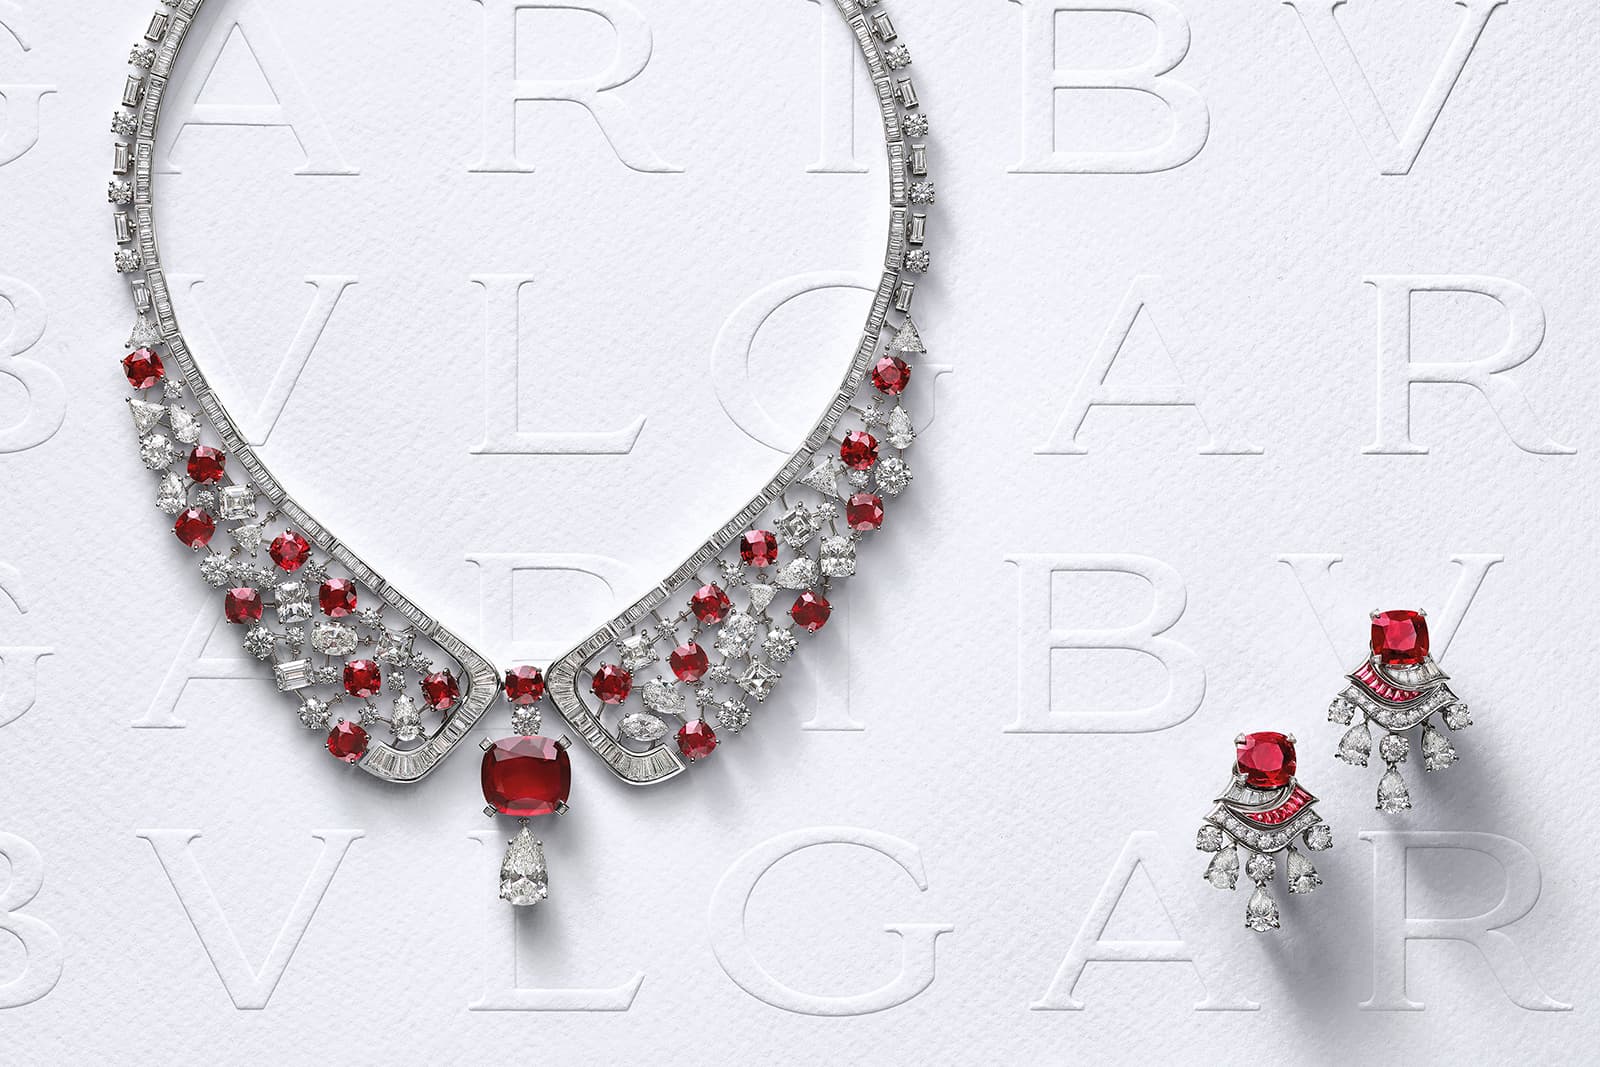 Bulgari’s Forever Rubies necklace and earrings. The necklace is set with a rare 10.04 Mozambique ruby accompanied by a spectacular set of 20 vivid red rubies